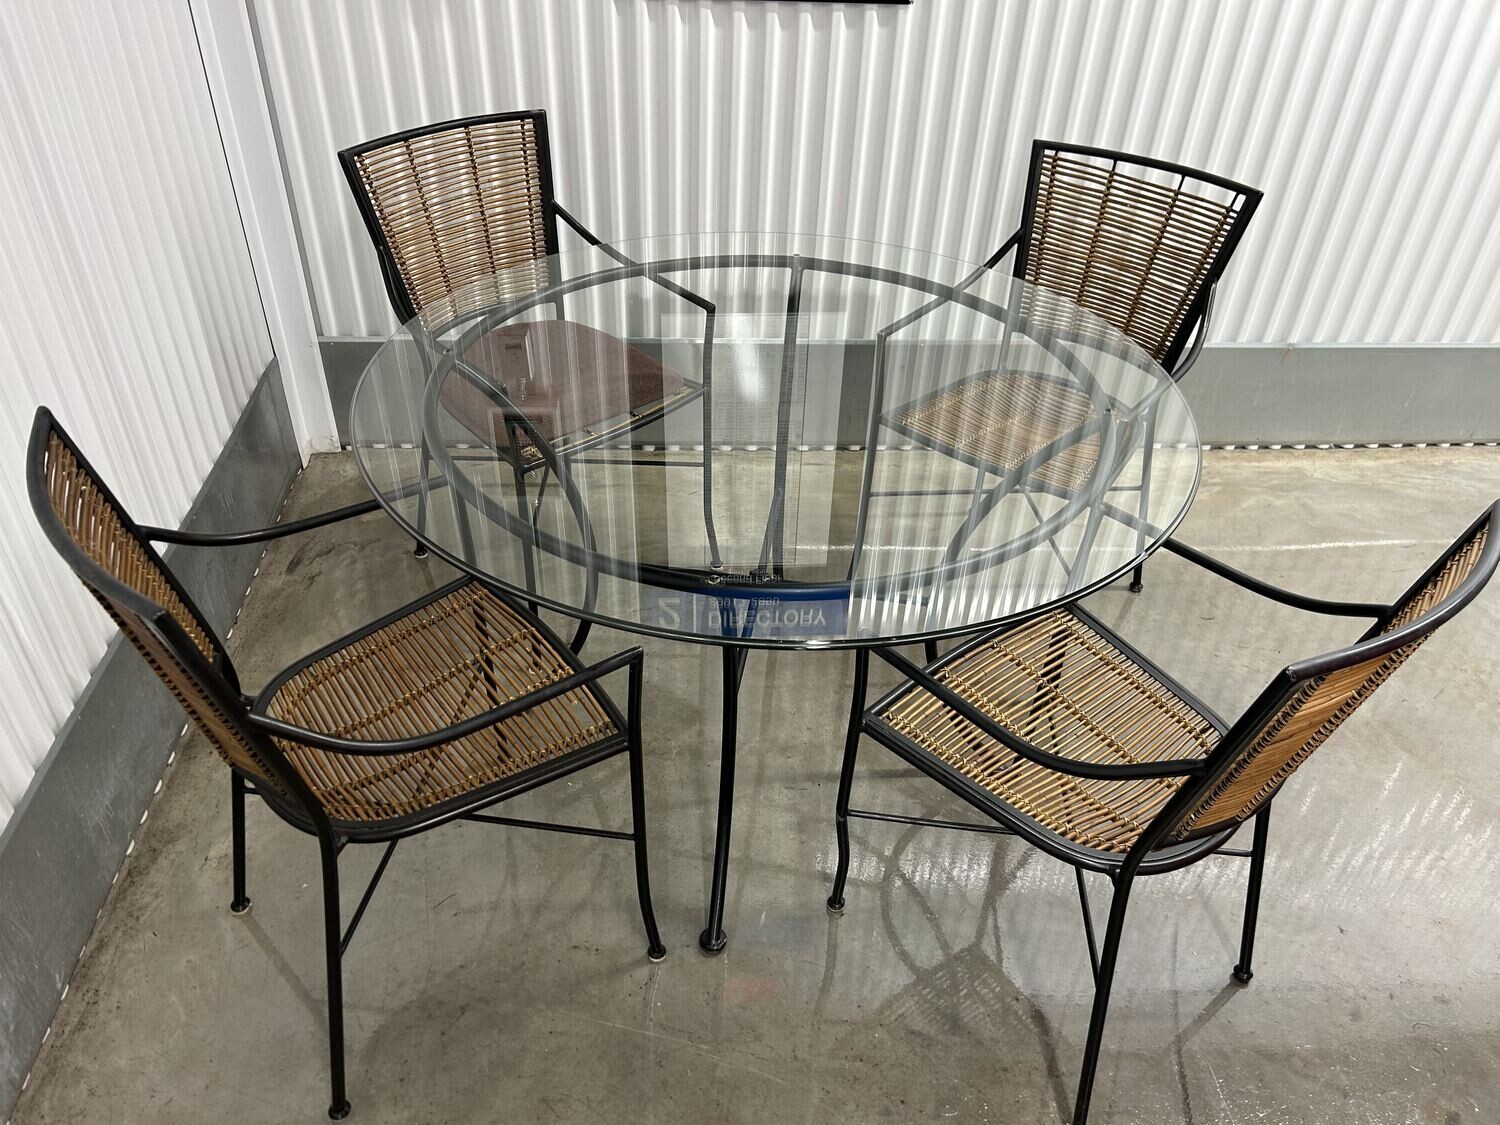 Patio Set with black frame, bamboo seats &amp; backs #2118 ** 6 wks. to sell, full price